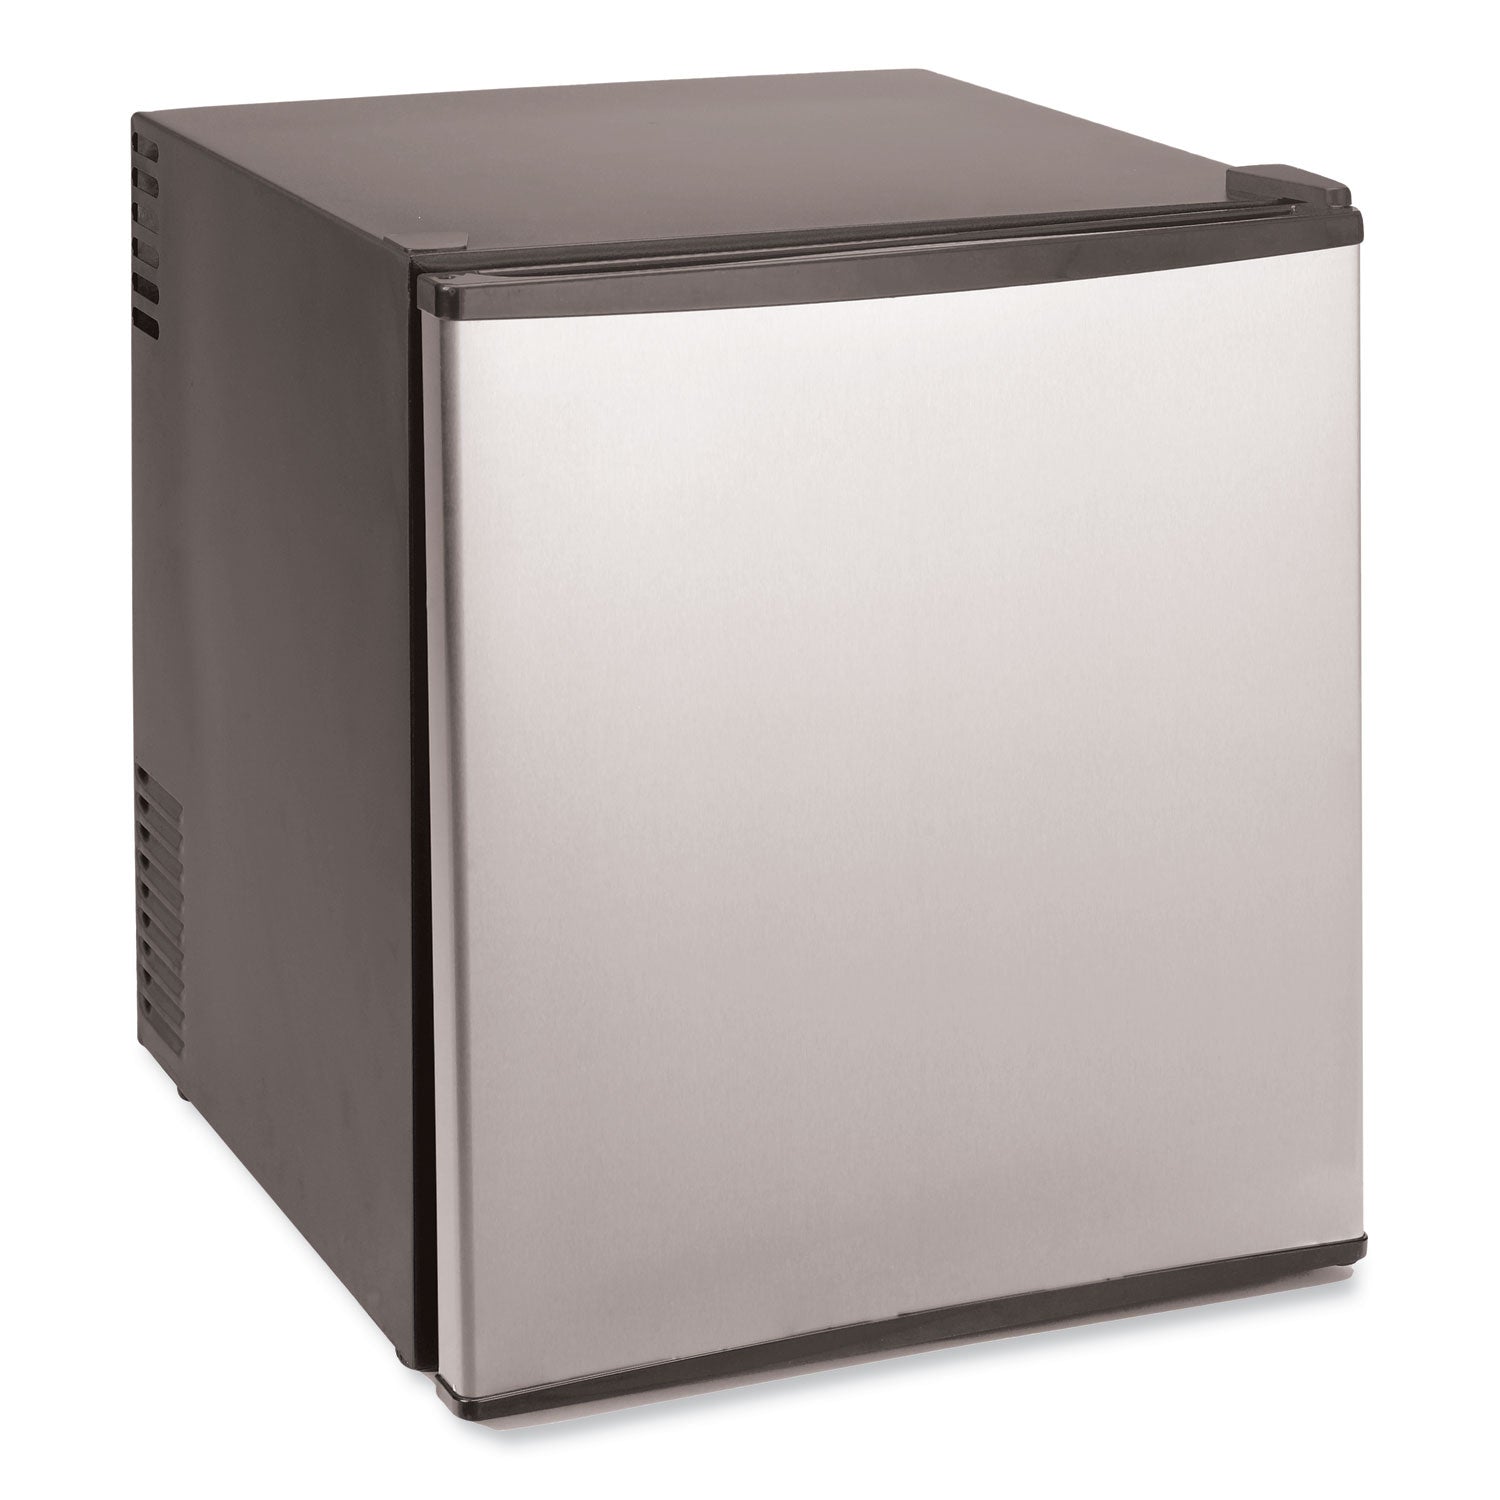 17-cuft-superconductor-compact-refrigerator-black-stainless-steel_avasar1702n3s - 1